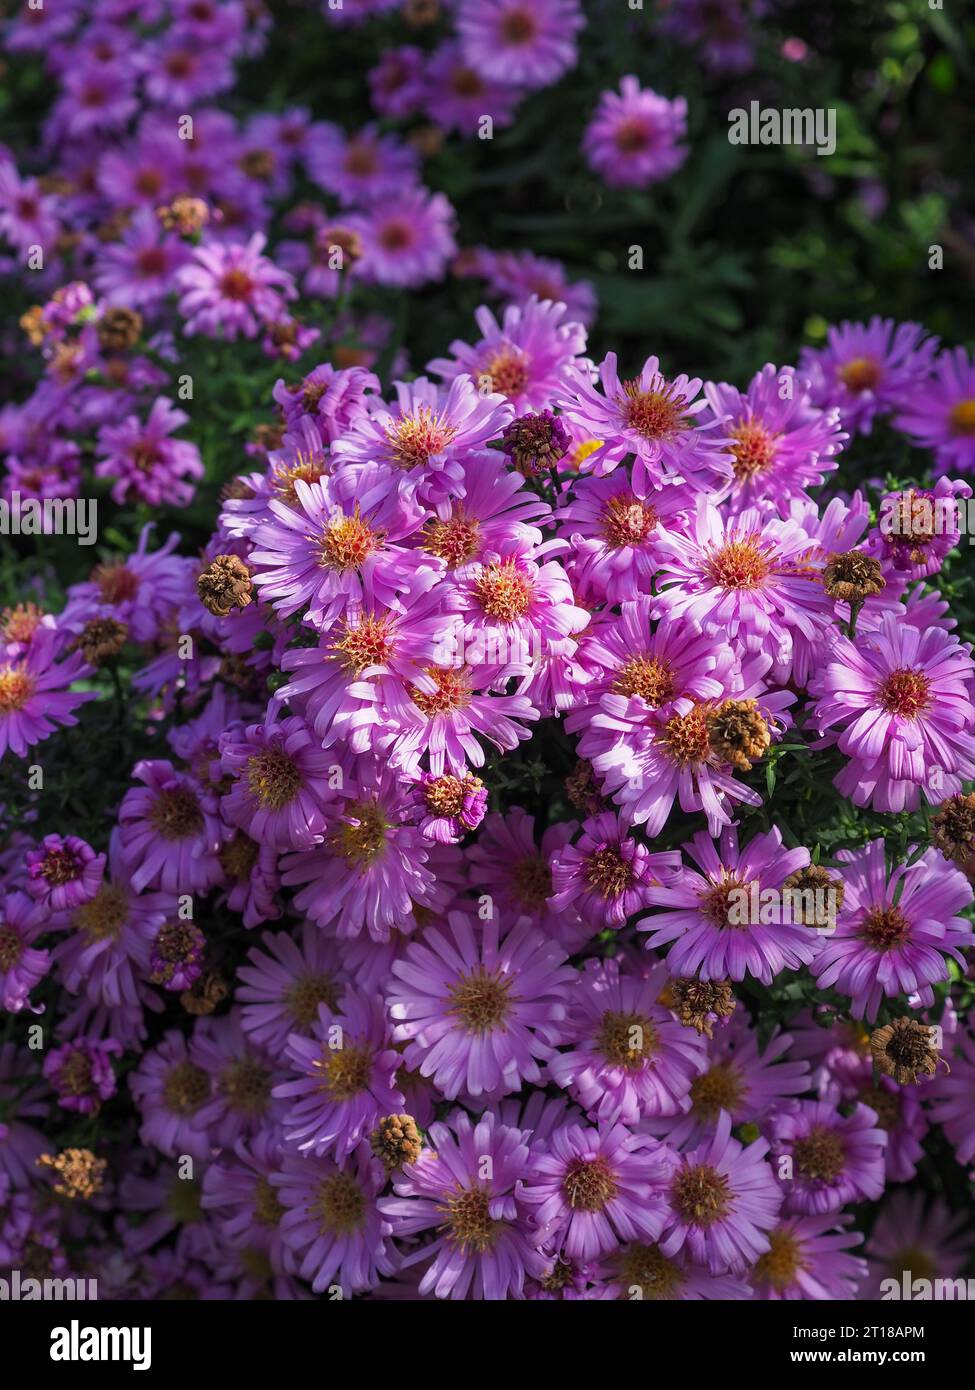 Close up portrait of a mass of bright purple Aster amellus 'Lac de Geneve' flowers growing in a British garden in October (Michaelmas daisy) Stock Photo